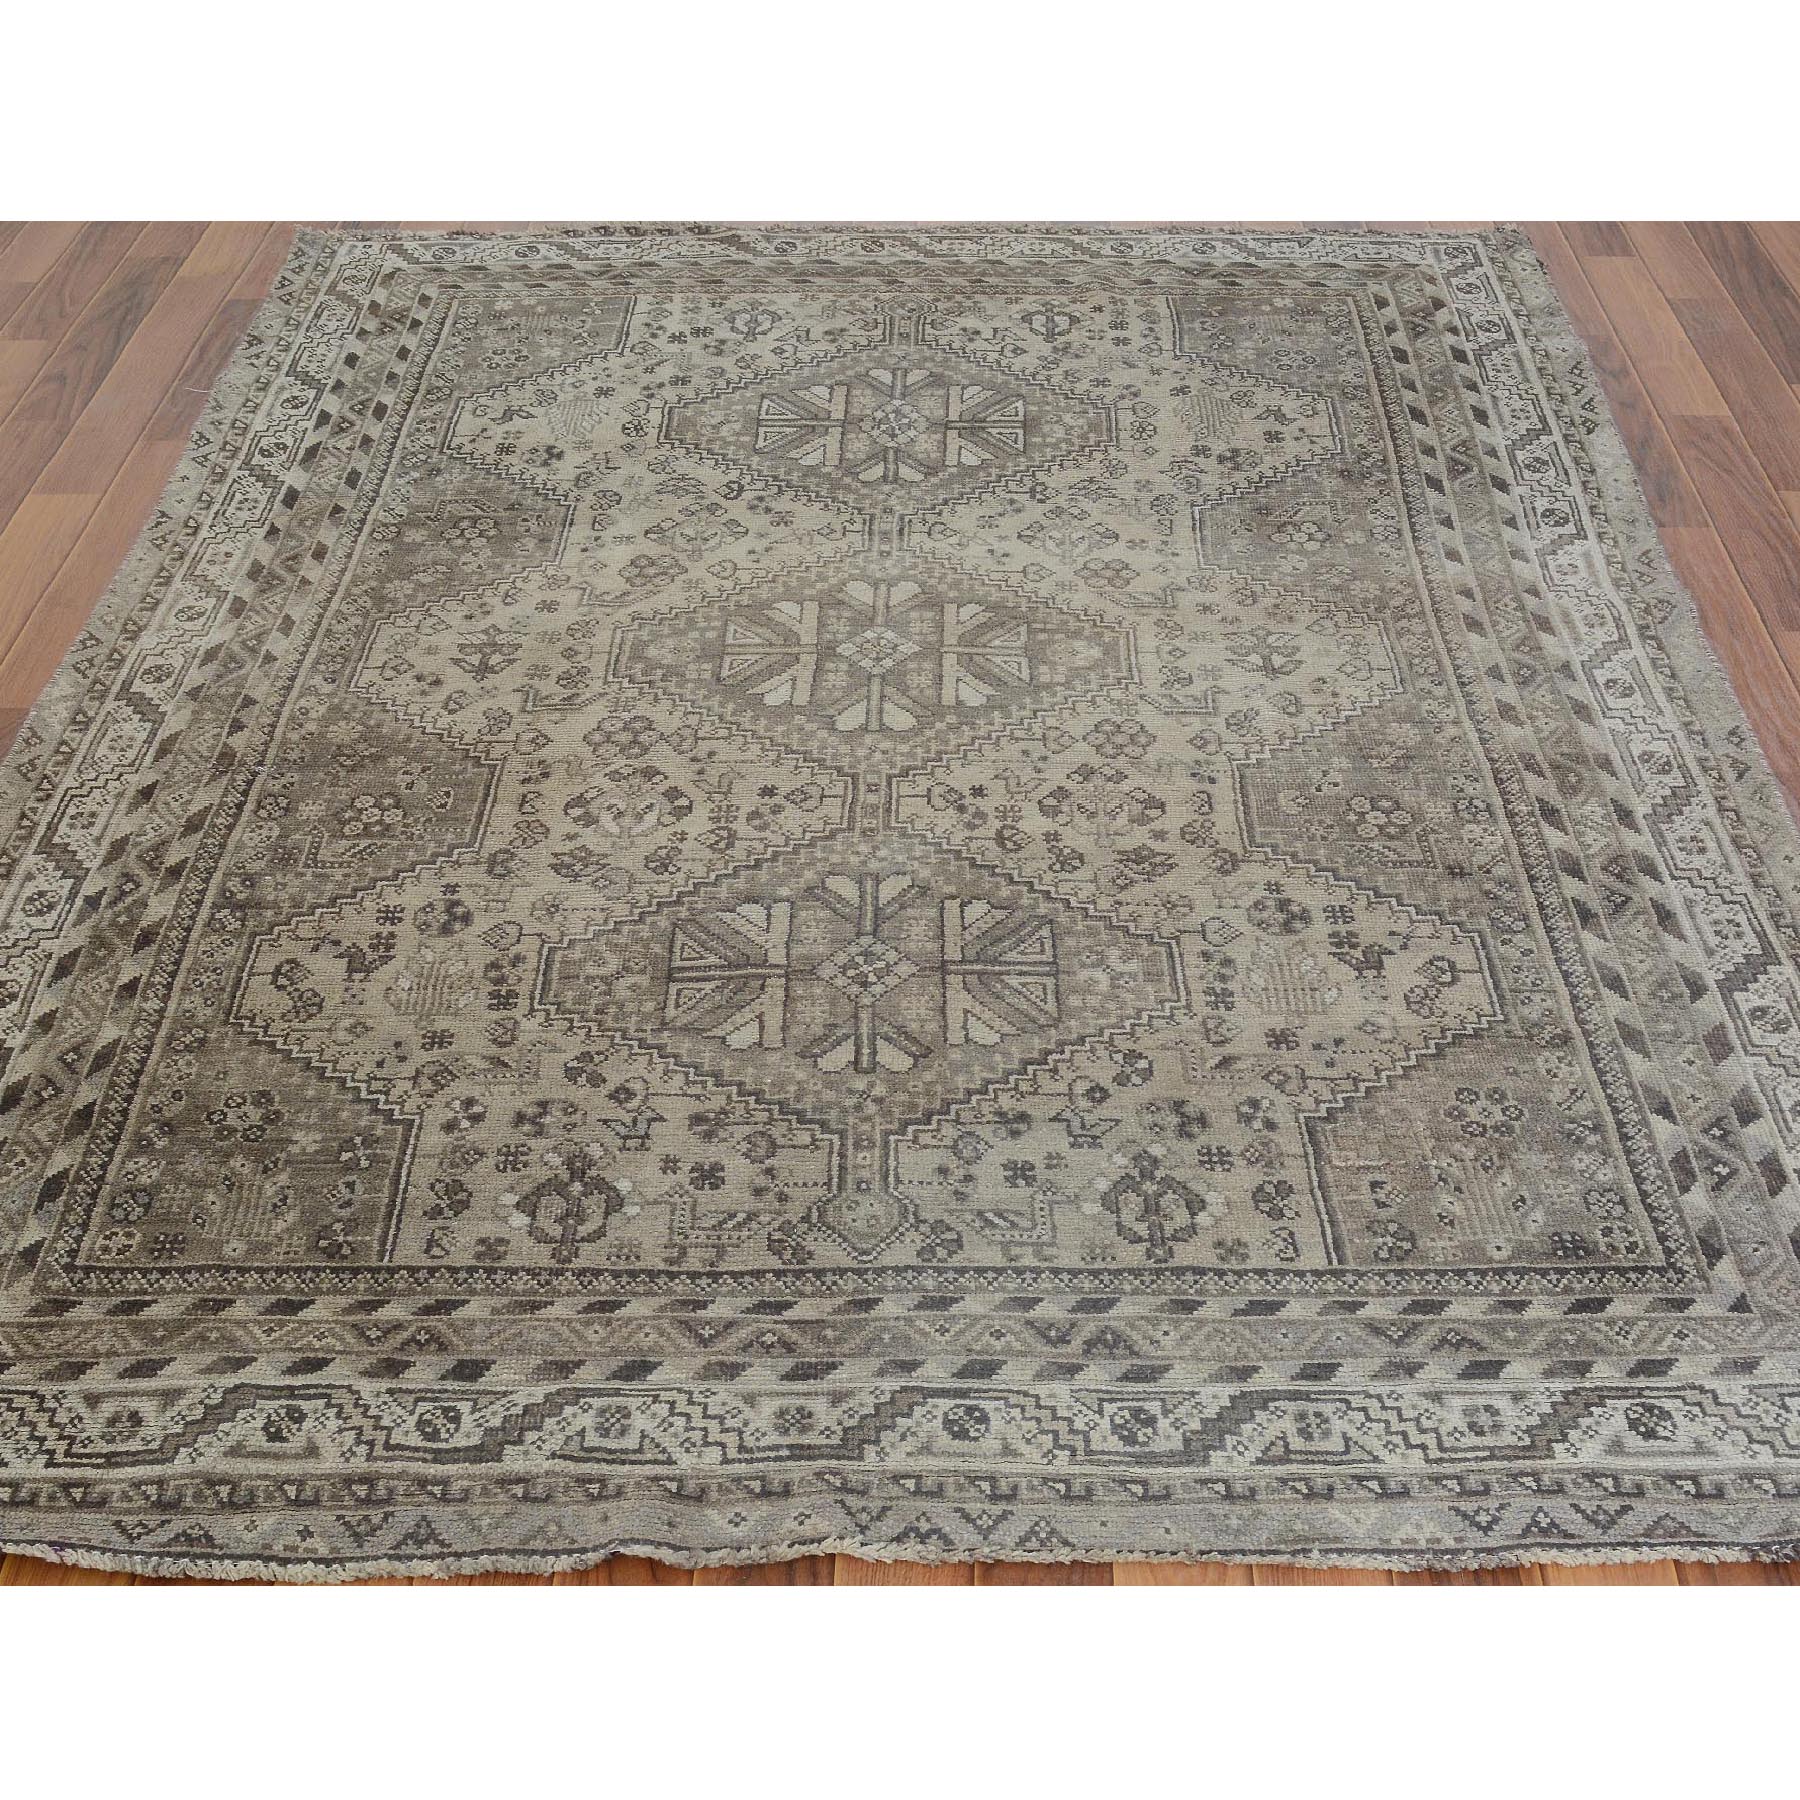 5-8 x8- Natural Colors Old and Worn Down Persian Shiraz Hand Knotted Oriental Rug 